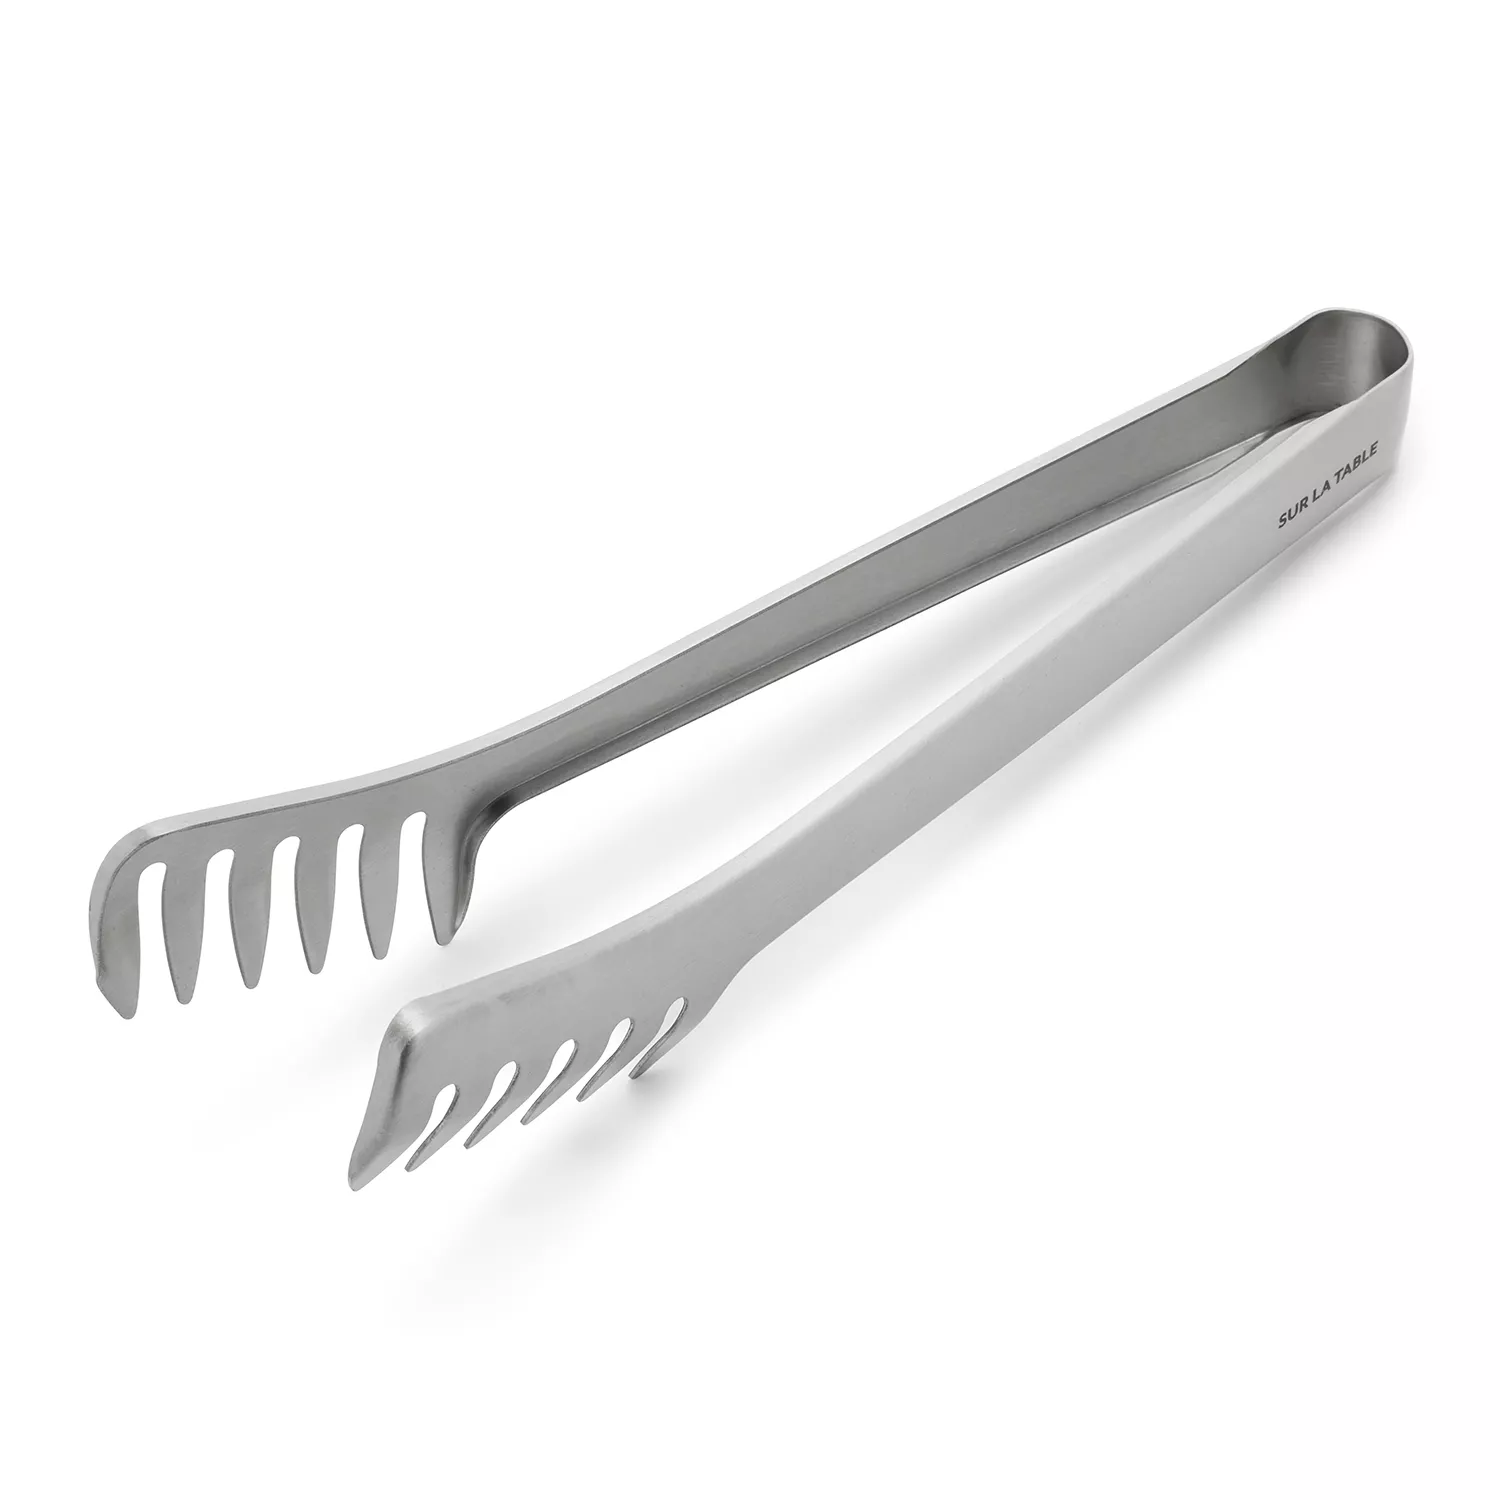 Sur La Table Stainless Steel Pasta Fork